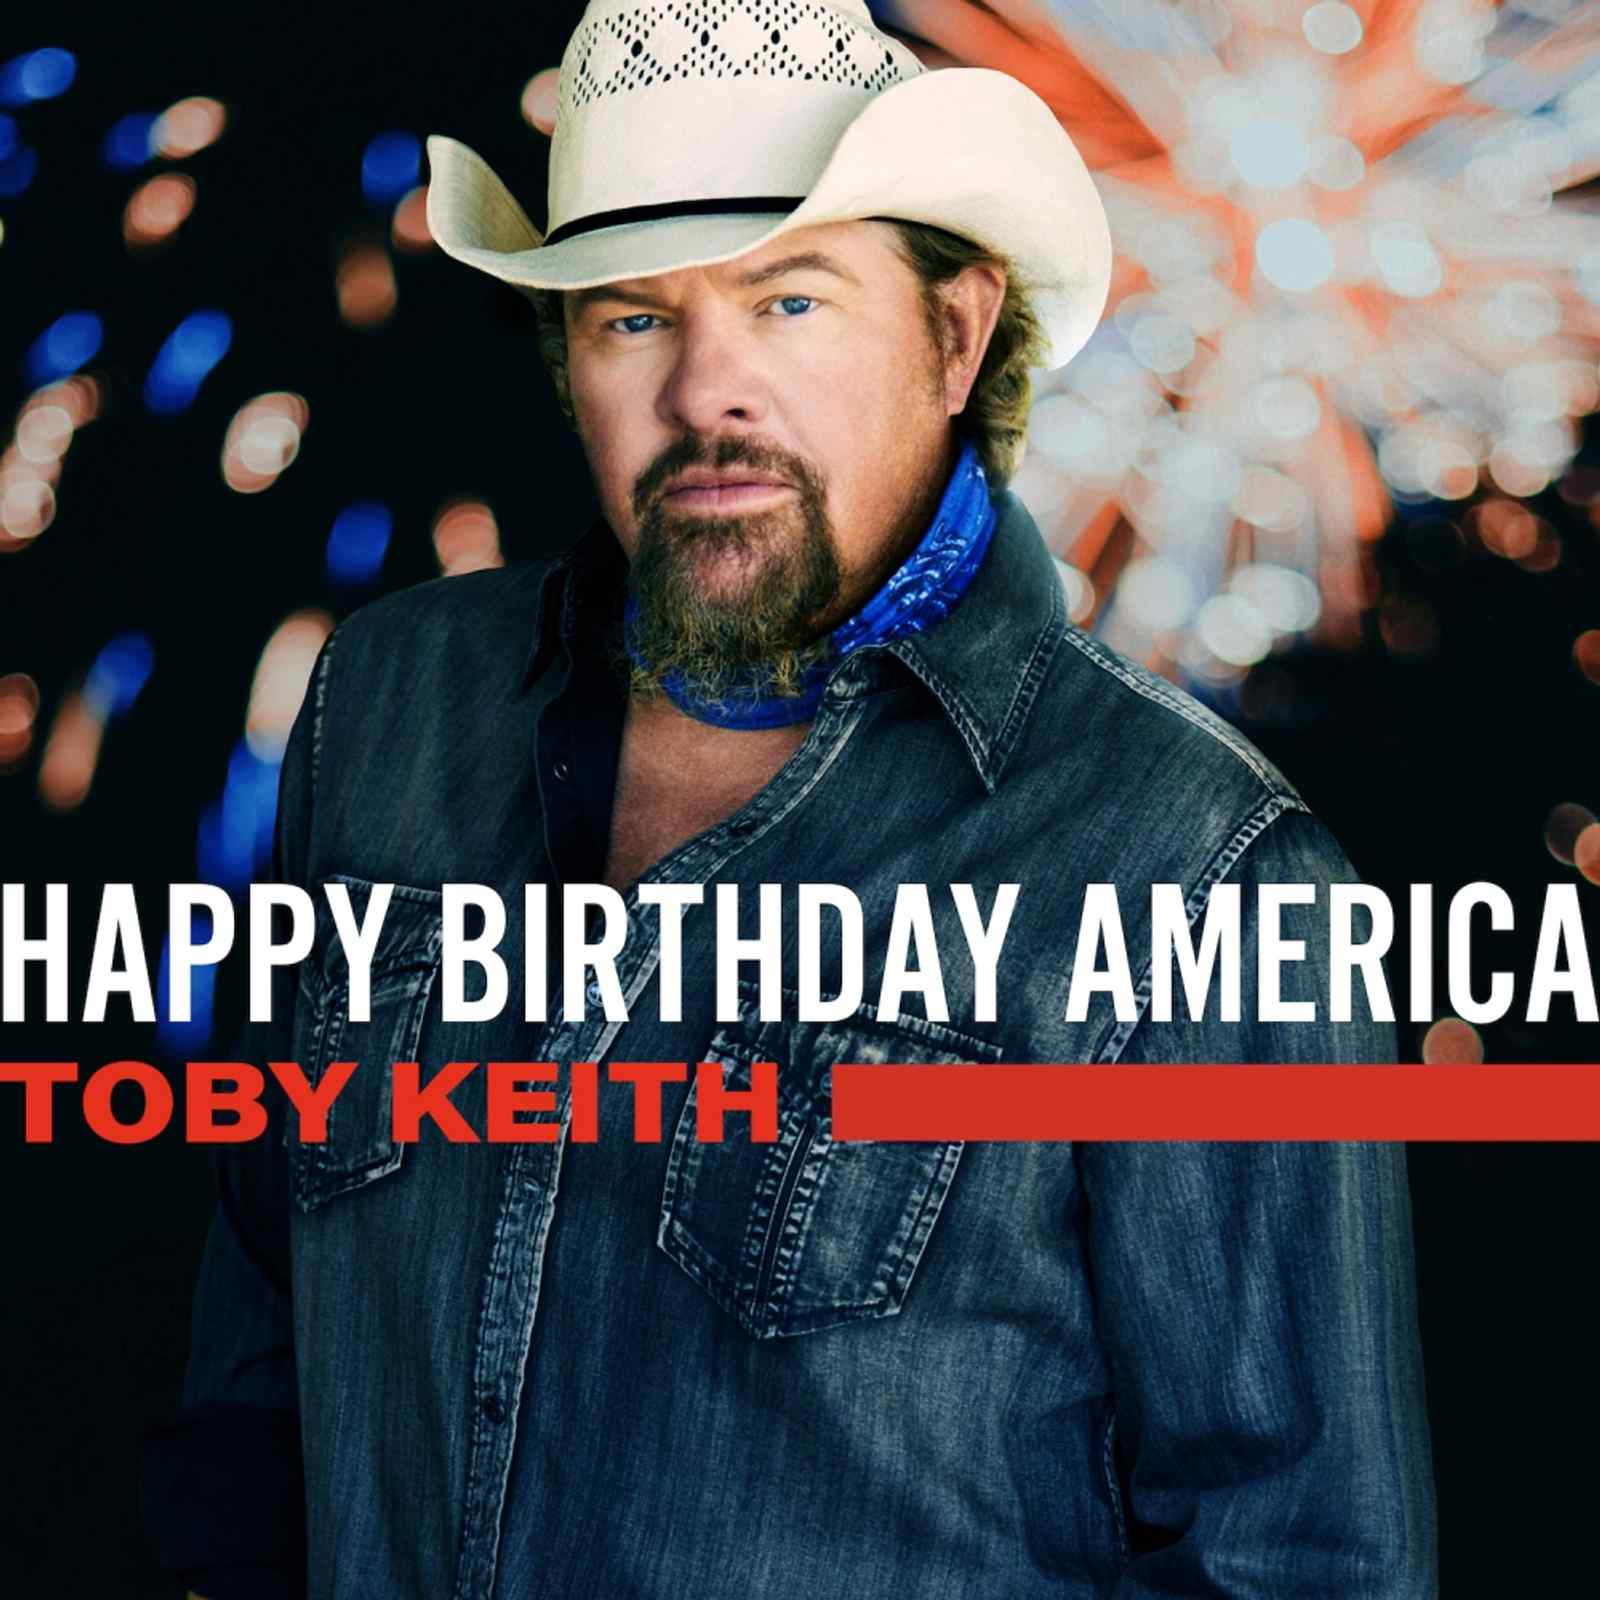 Toby Keith Hand-Selects Happy Birthday America Playlist